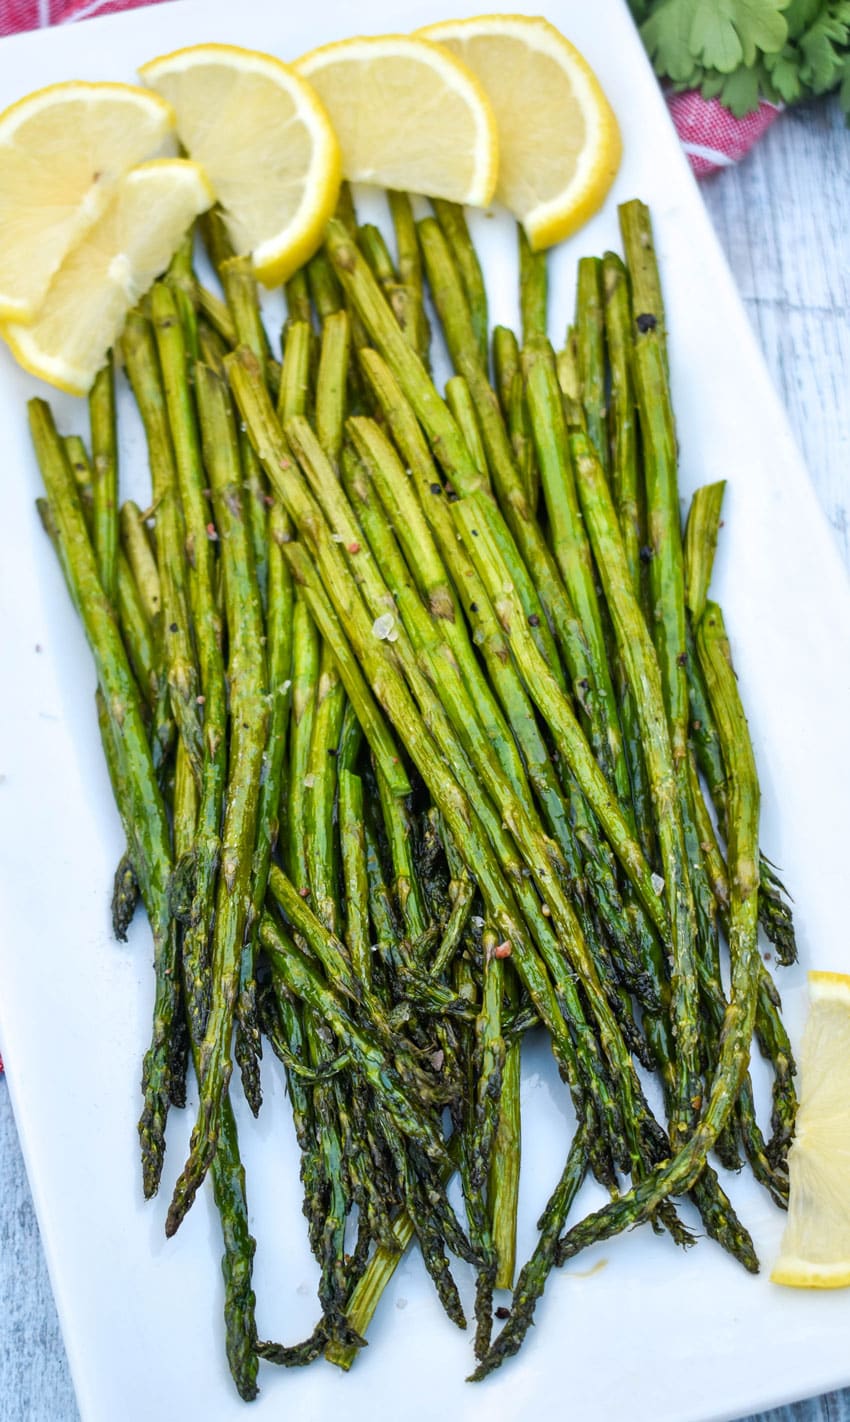 stalks of air fryer roasted asparagus on a white serving platter with slices of lemon on the side